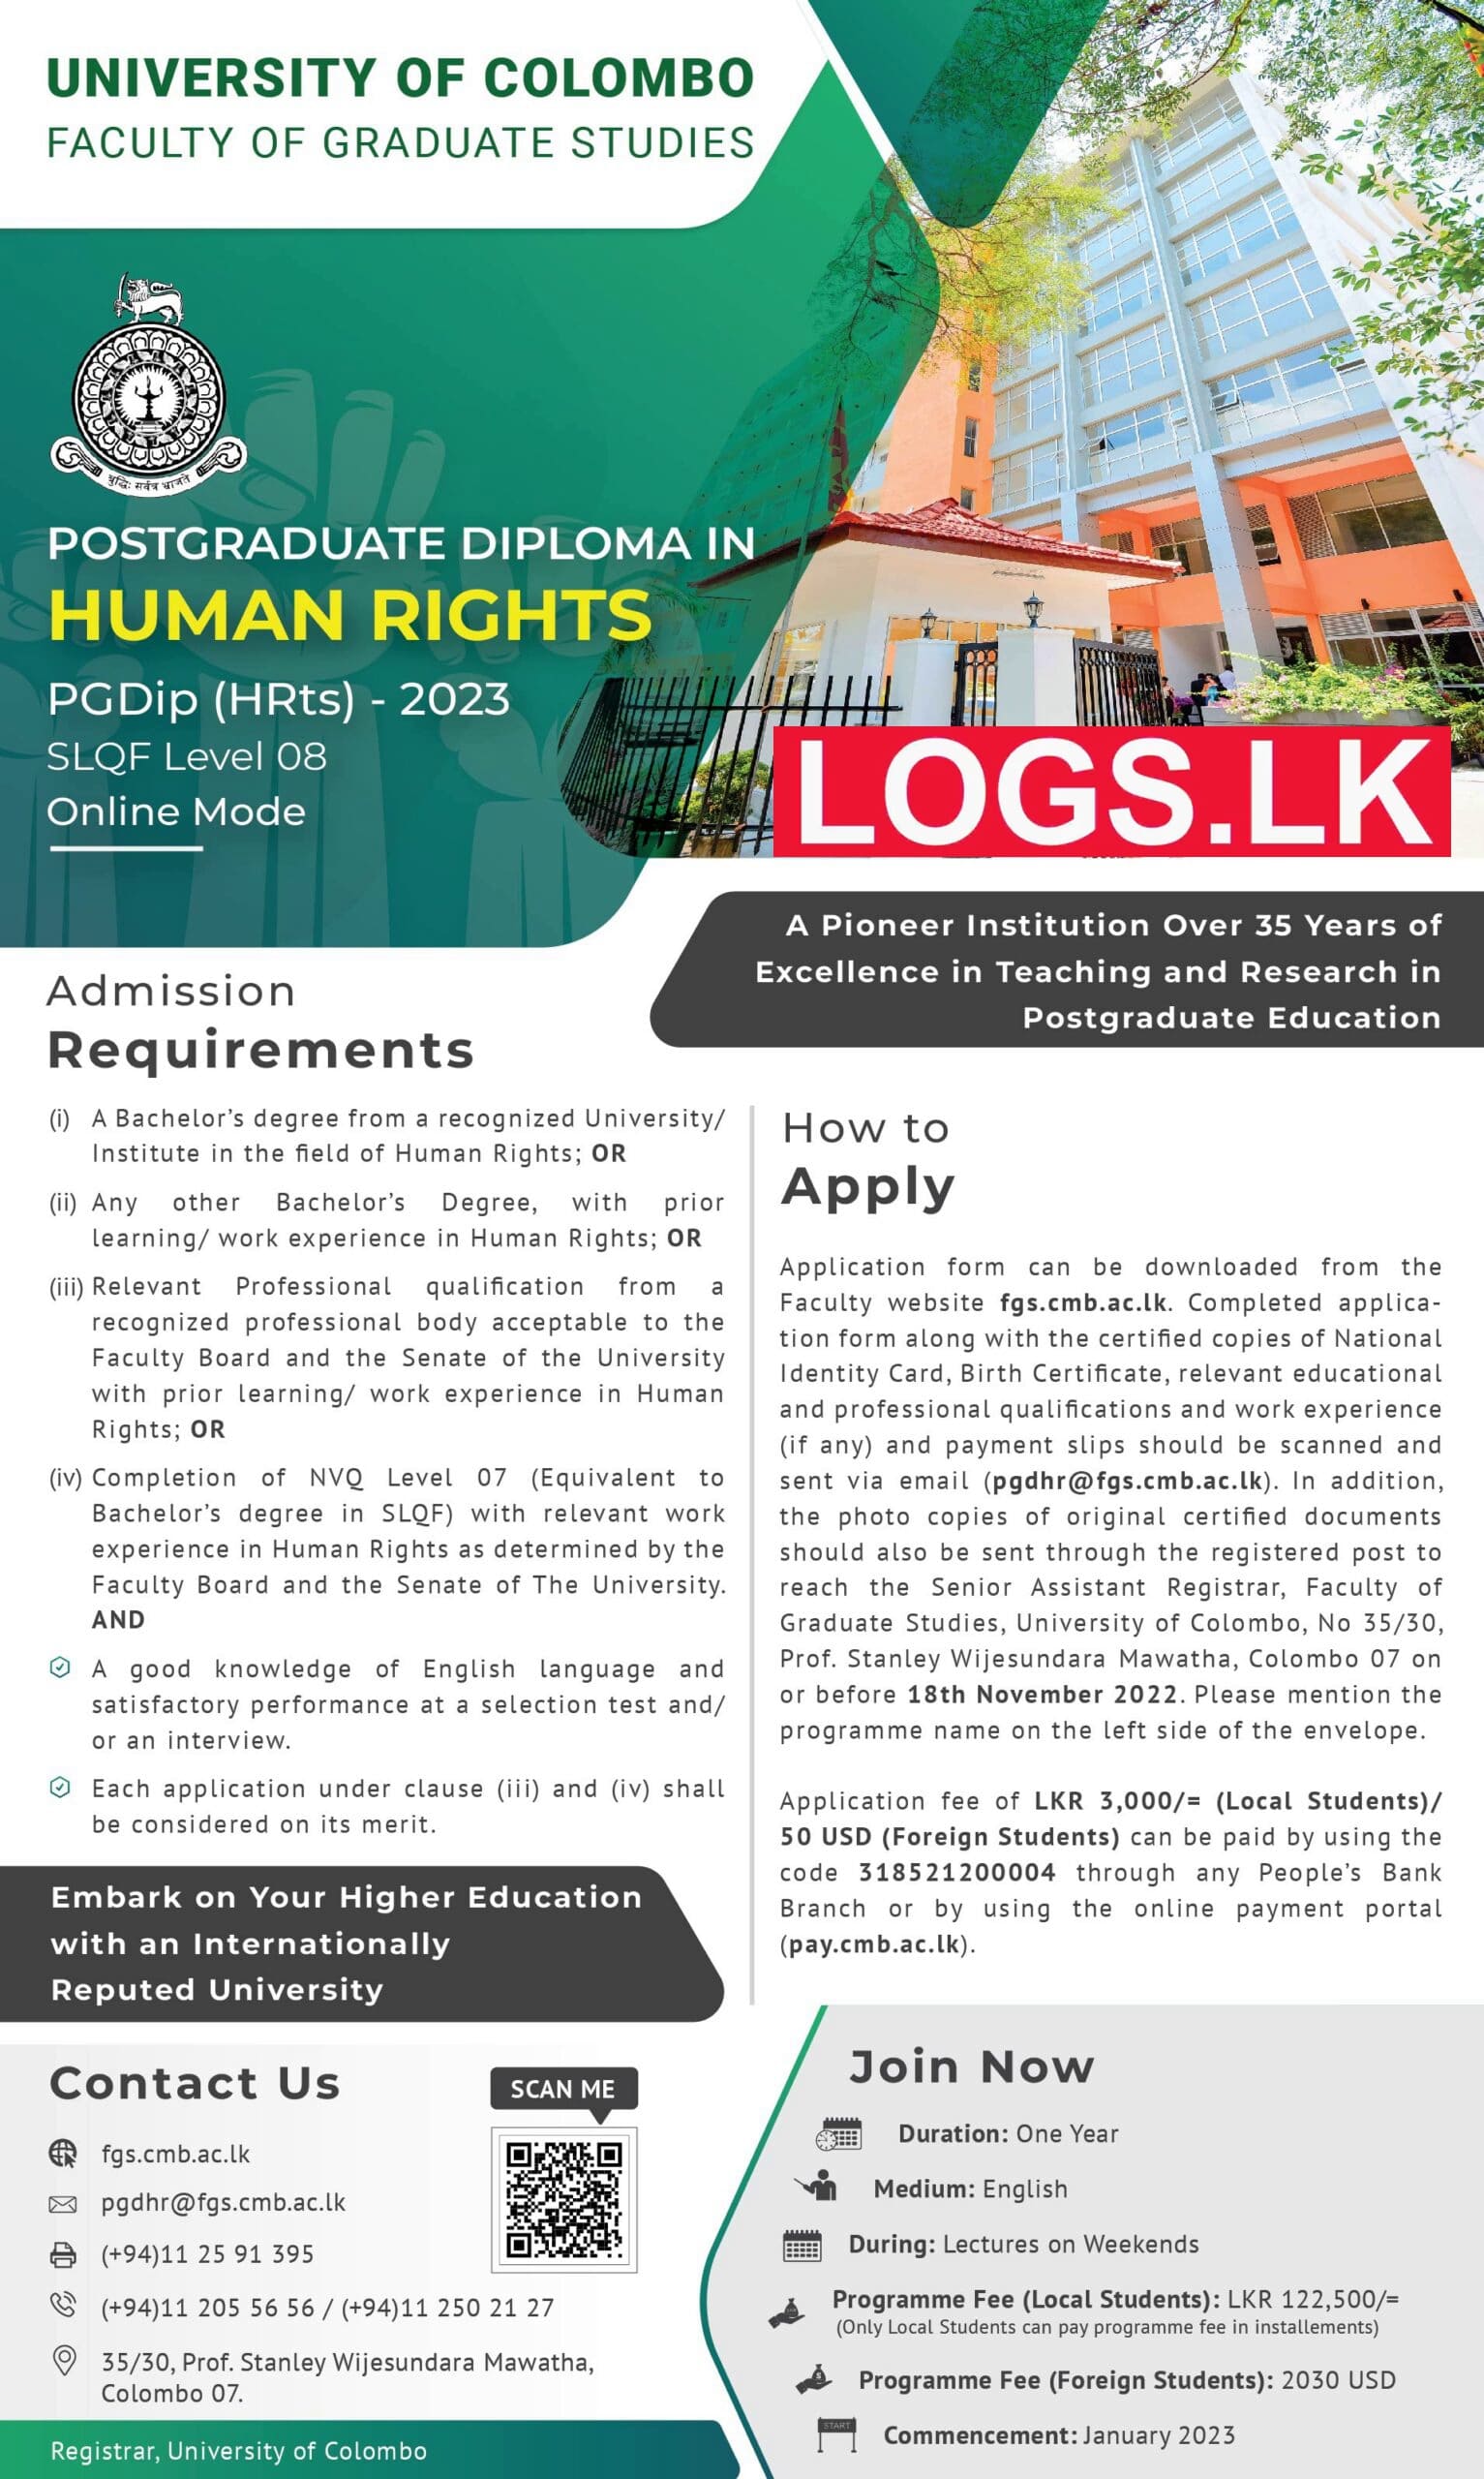 Postgraduate Diploma in Human Rights - PGDip (HRts) 2023 - Online Mode - University of Colombo Degree Details, Application Form